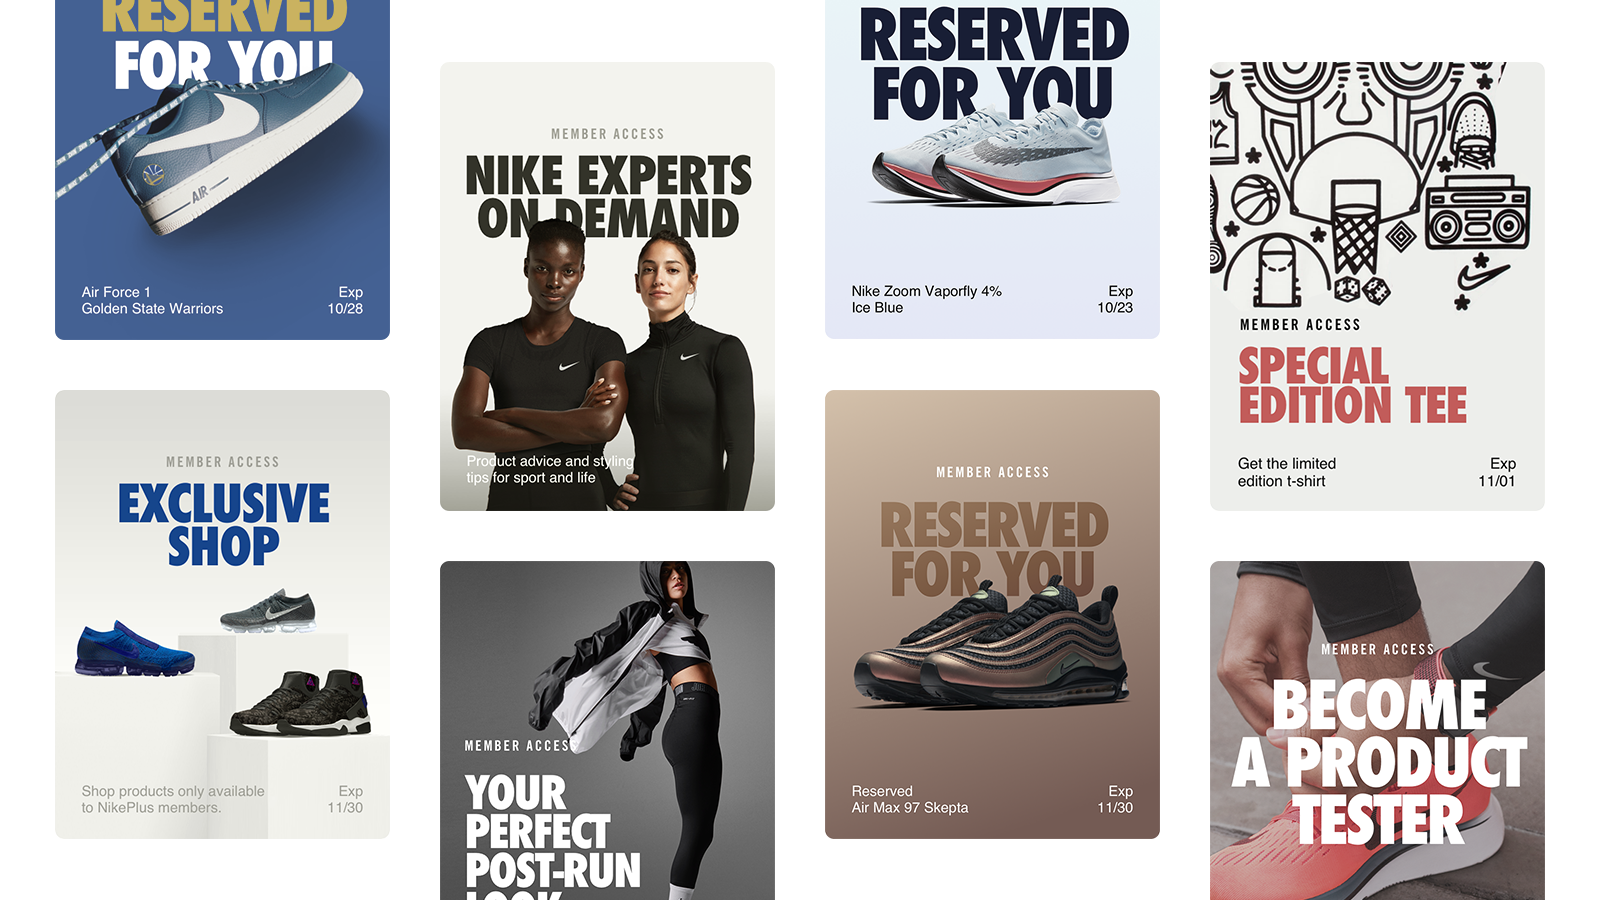 Images from 8 different Nike advertisements for the Nike Membership with images of shoes, athletes, and graphics.